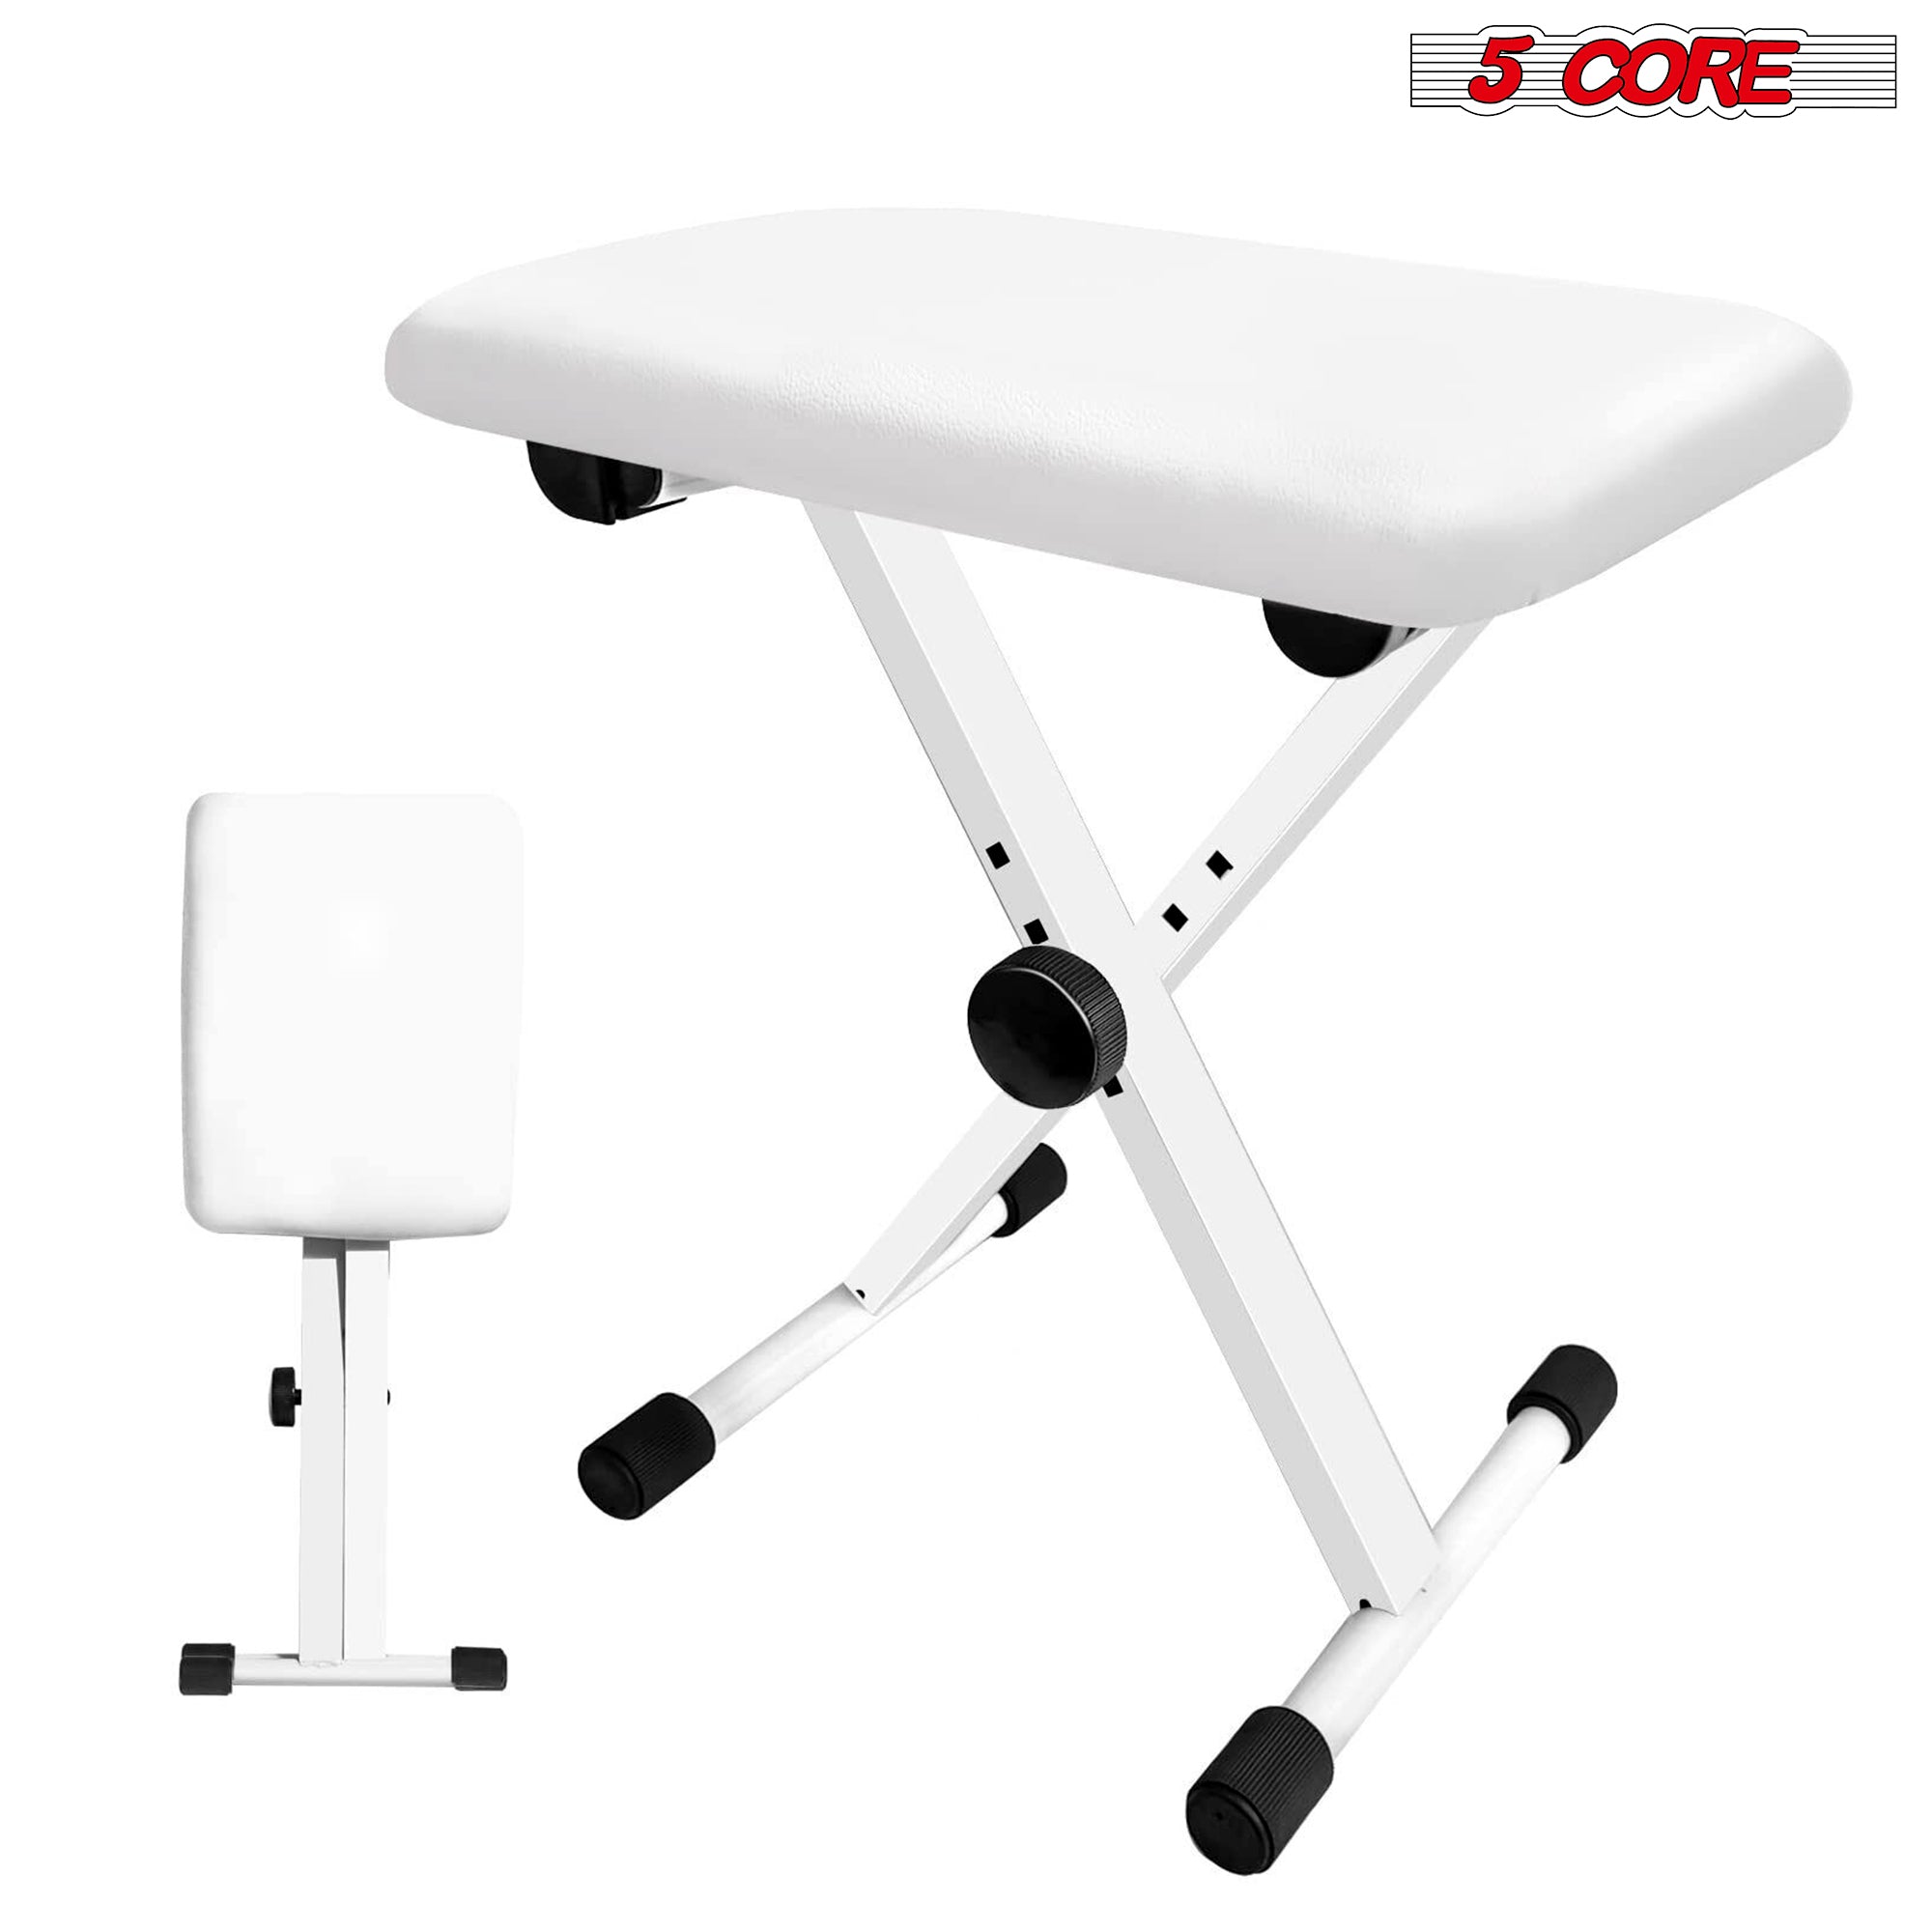 5 Core Keyboard Bench • X Style Piano Stool Height Adjustable 16.3–19.6" w Comfortable Padded Seat